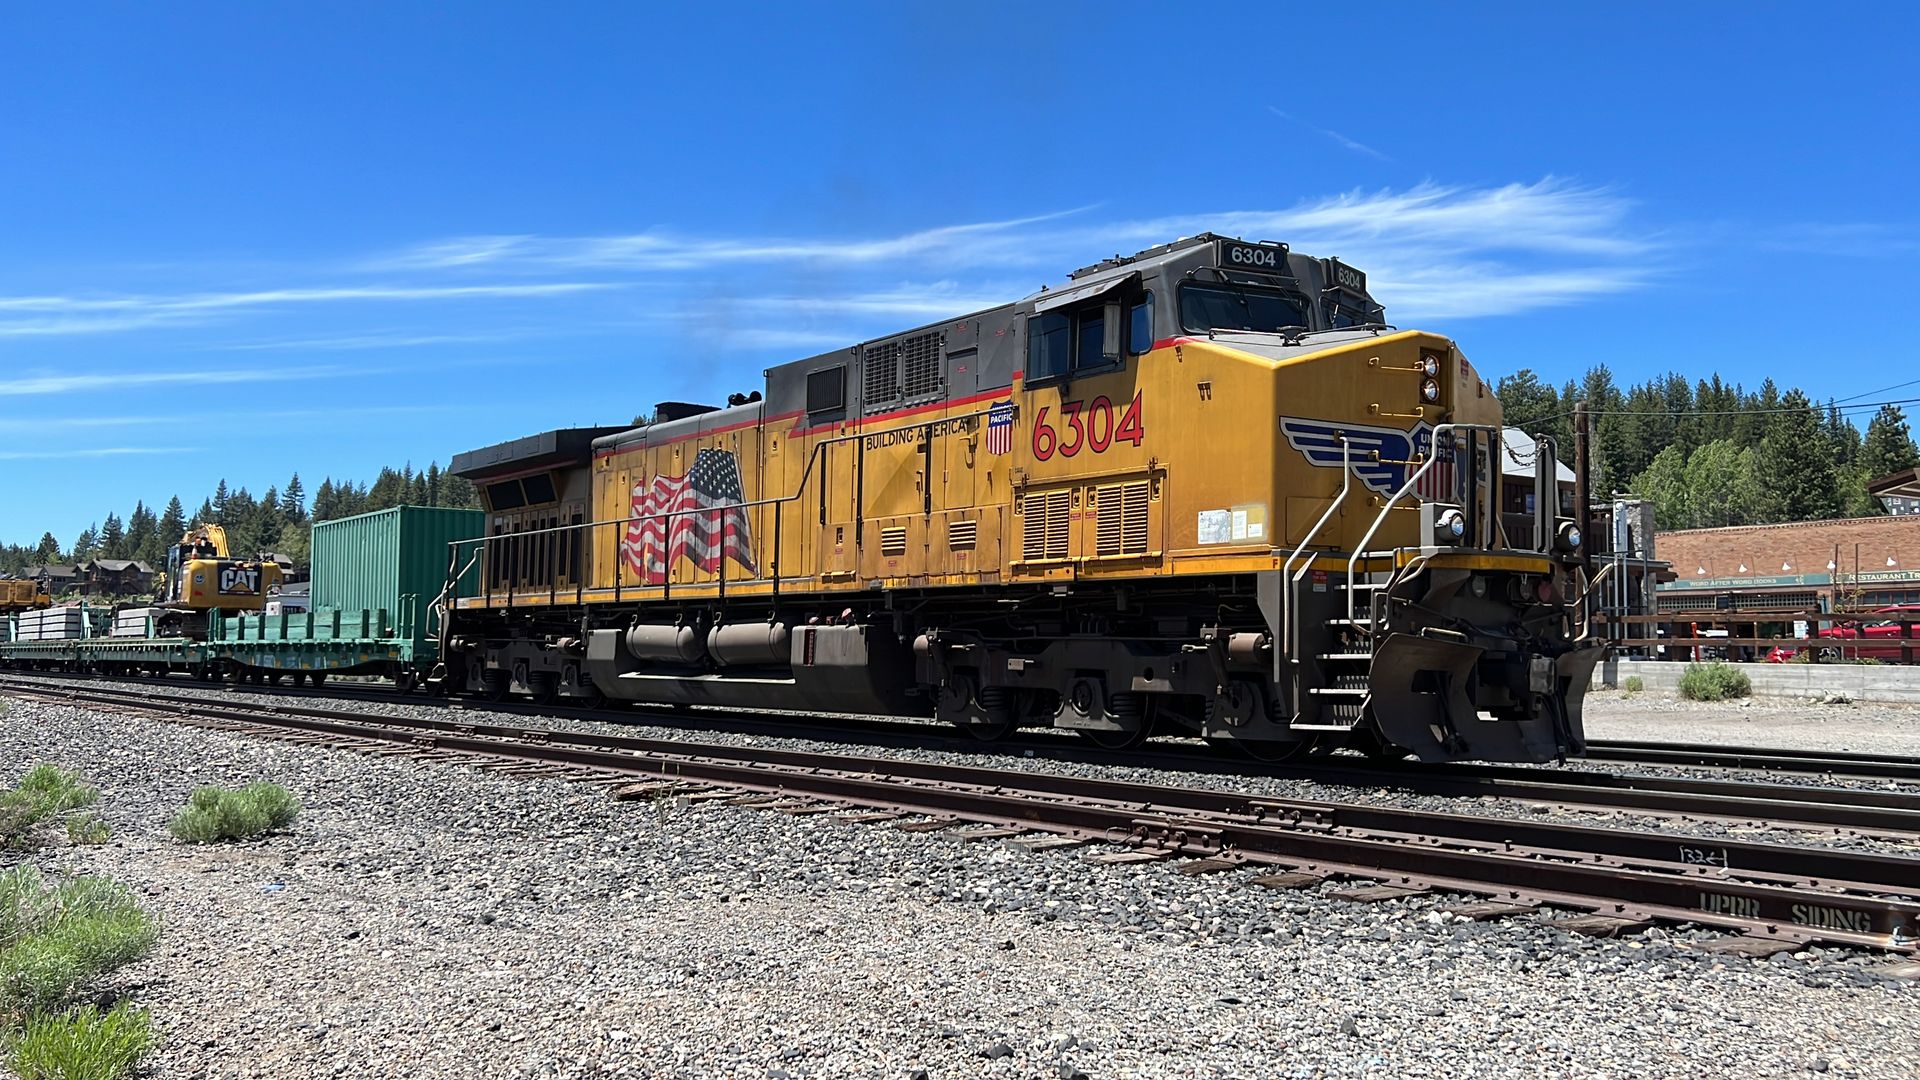 A Union Pacific locomotive pulling railcars is visible on tracks in Truckee, California.